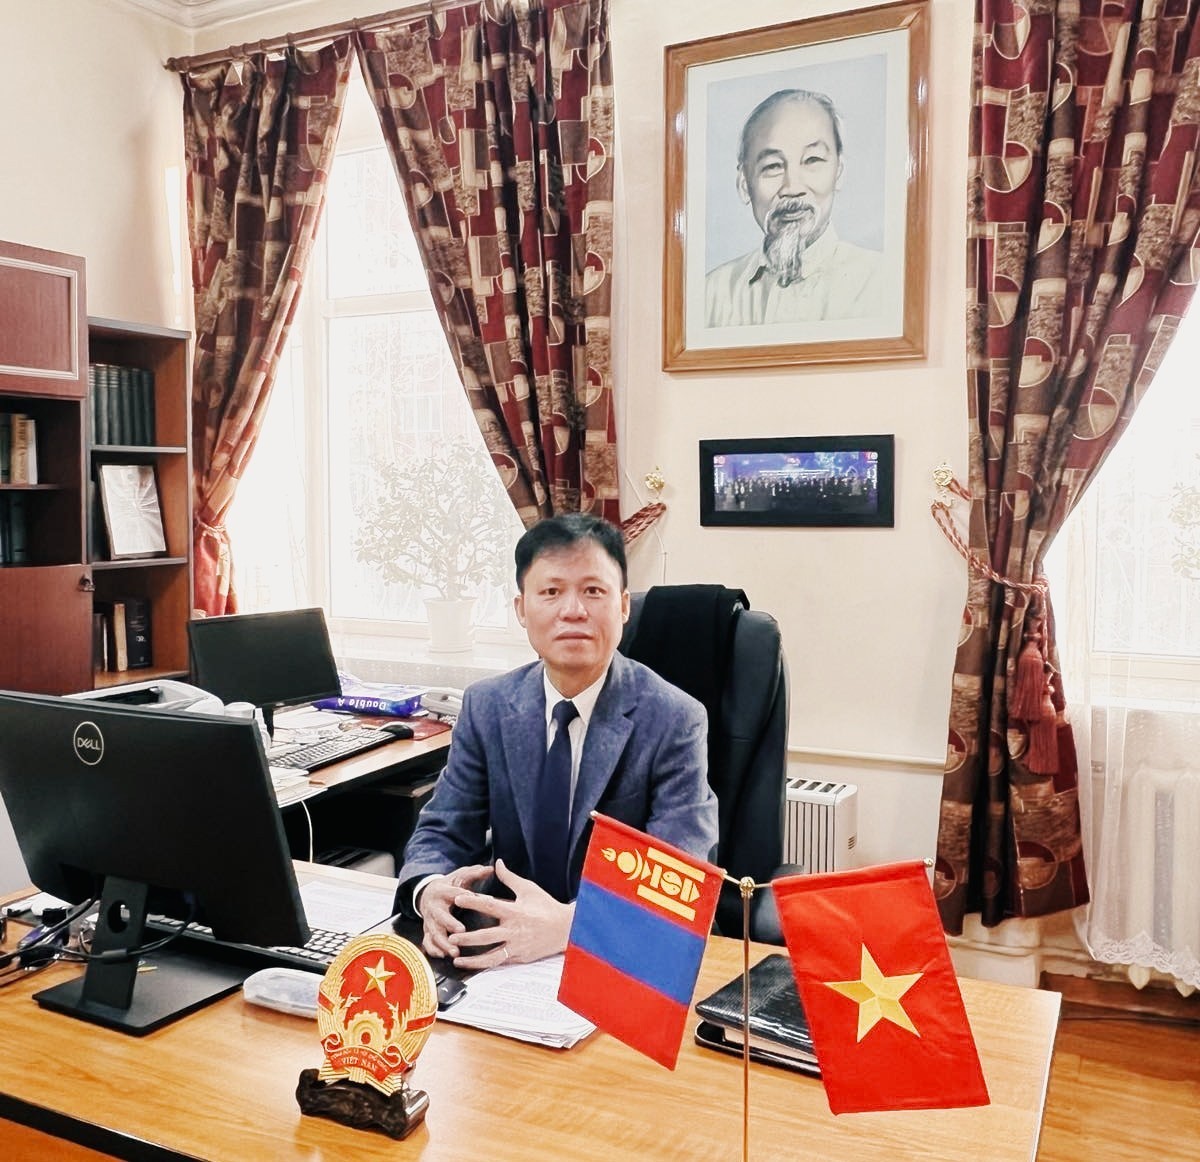 Mongolian President’s state visit is an important milestone in bilateral ties: Ambassador